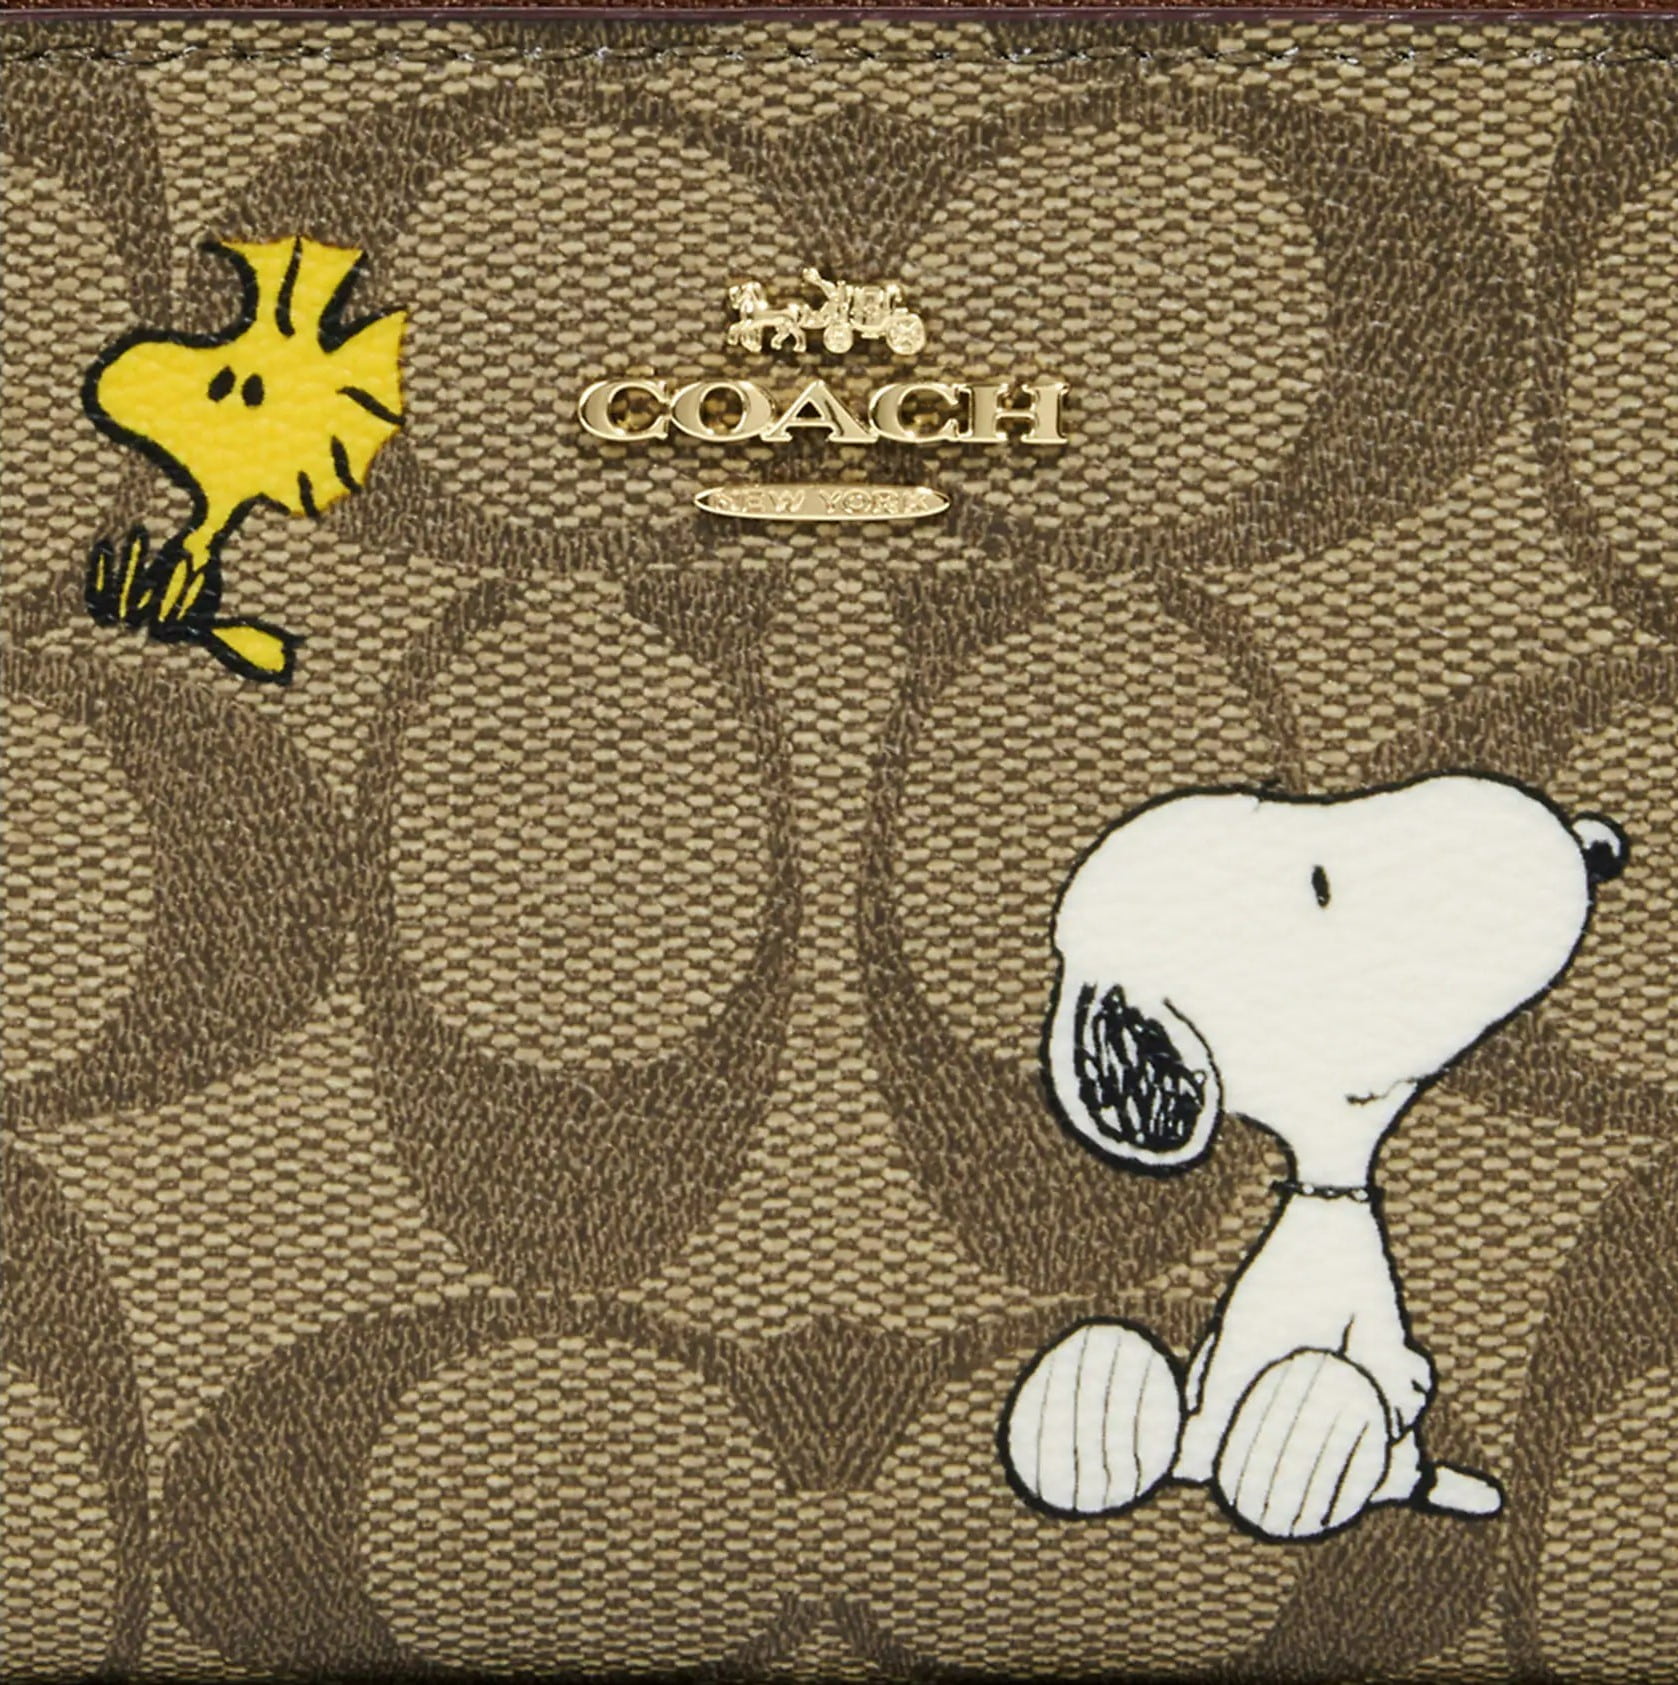 VÍ NGẮN NỮ NÂU SÁNG COACH X PEANUTS SMALL ZIP AROUND WALLET IN SIGNATURE CANVAS WITH SNOOPY PRESENTS PRINT 4